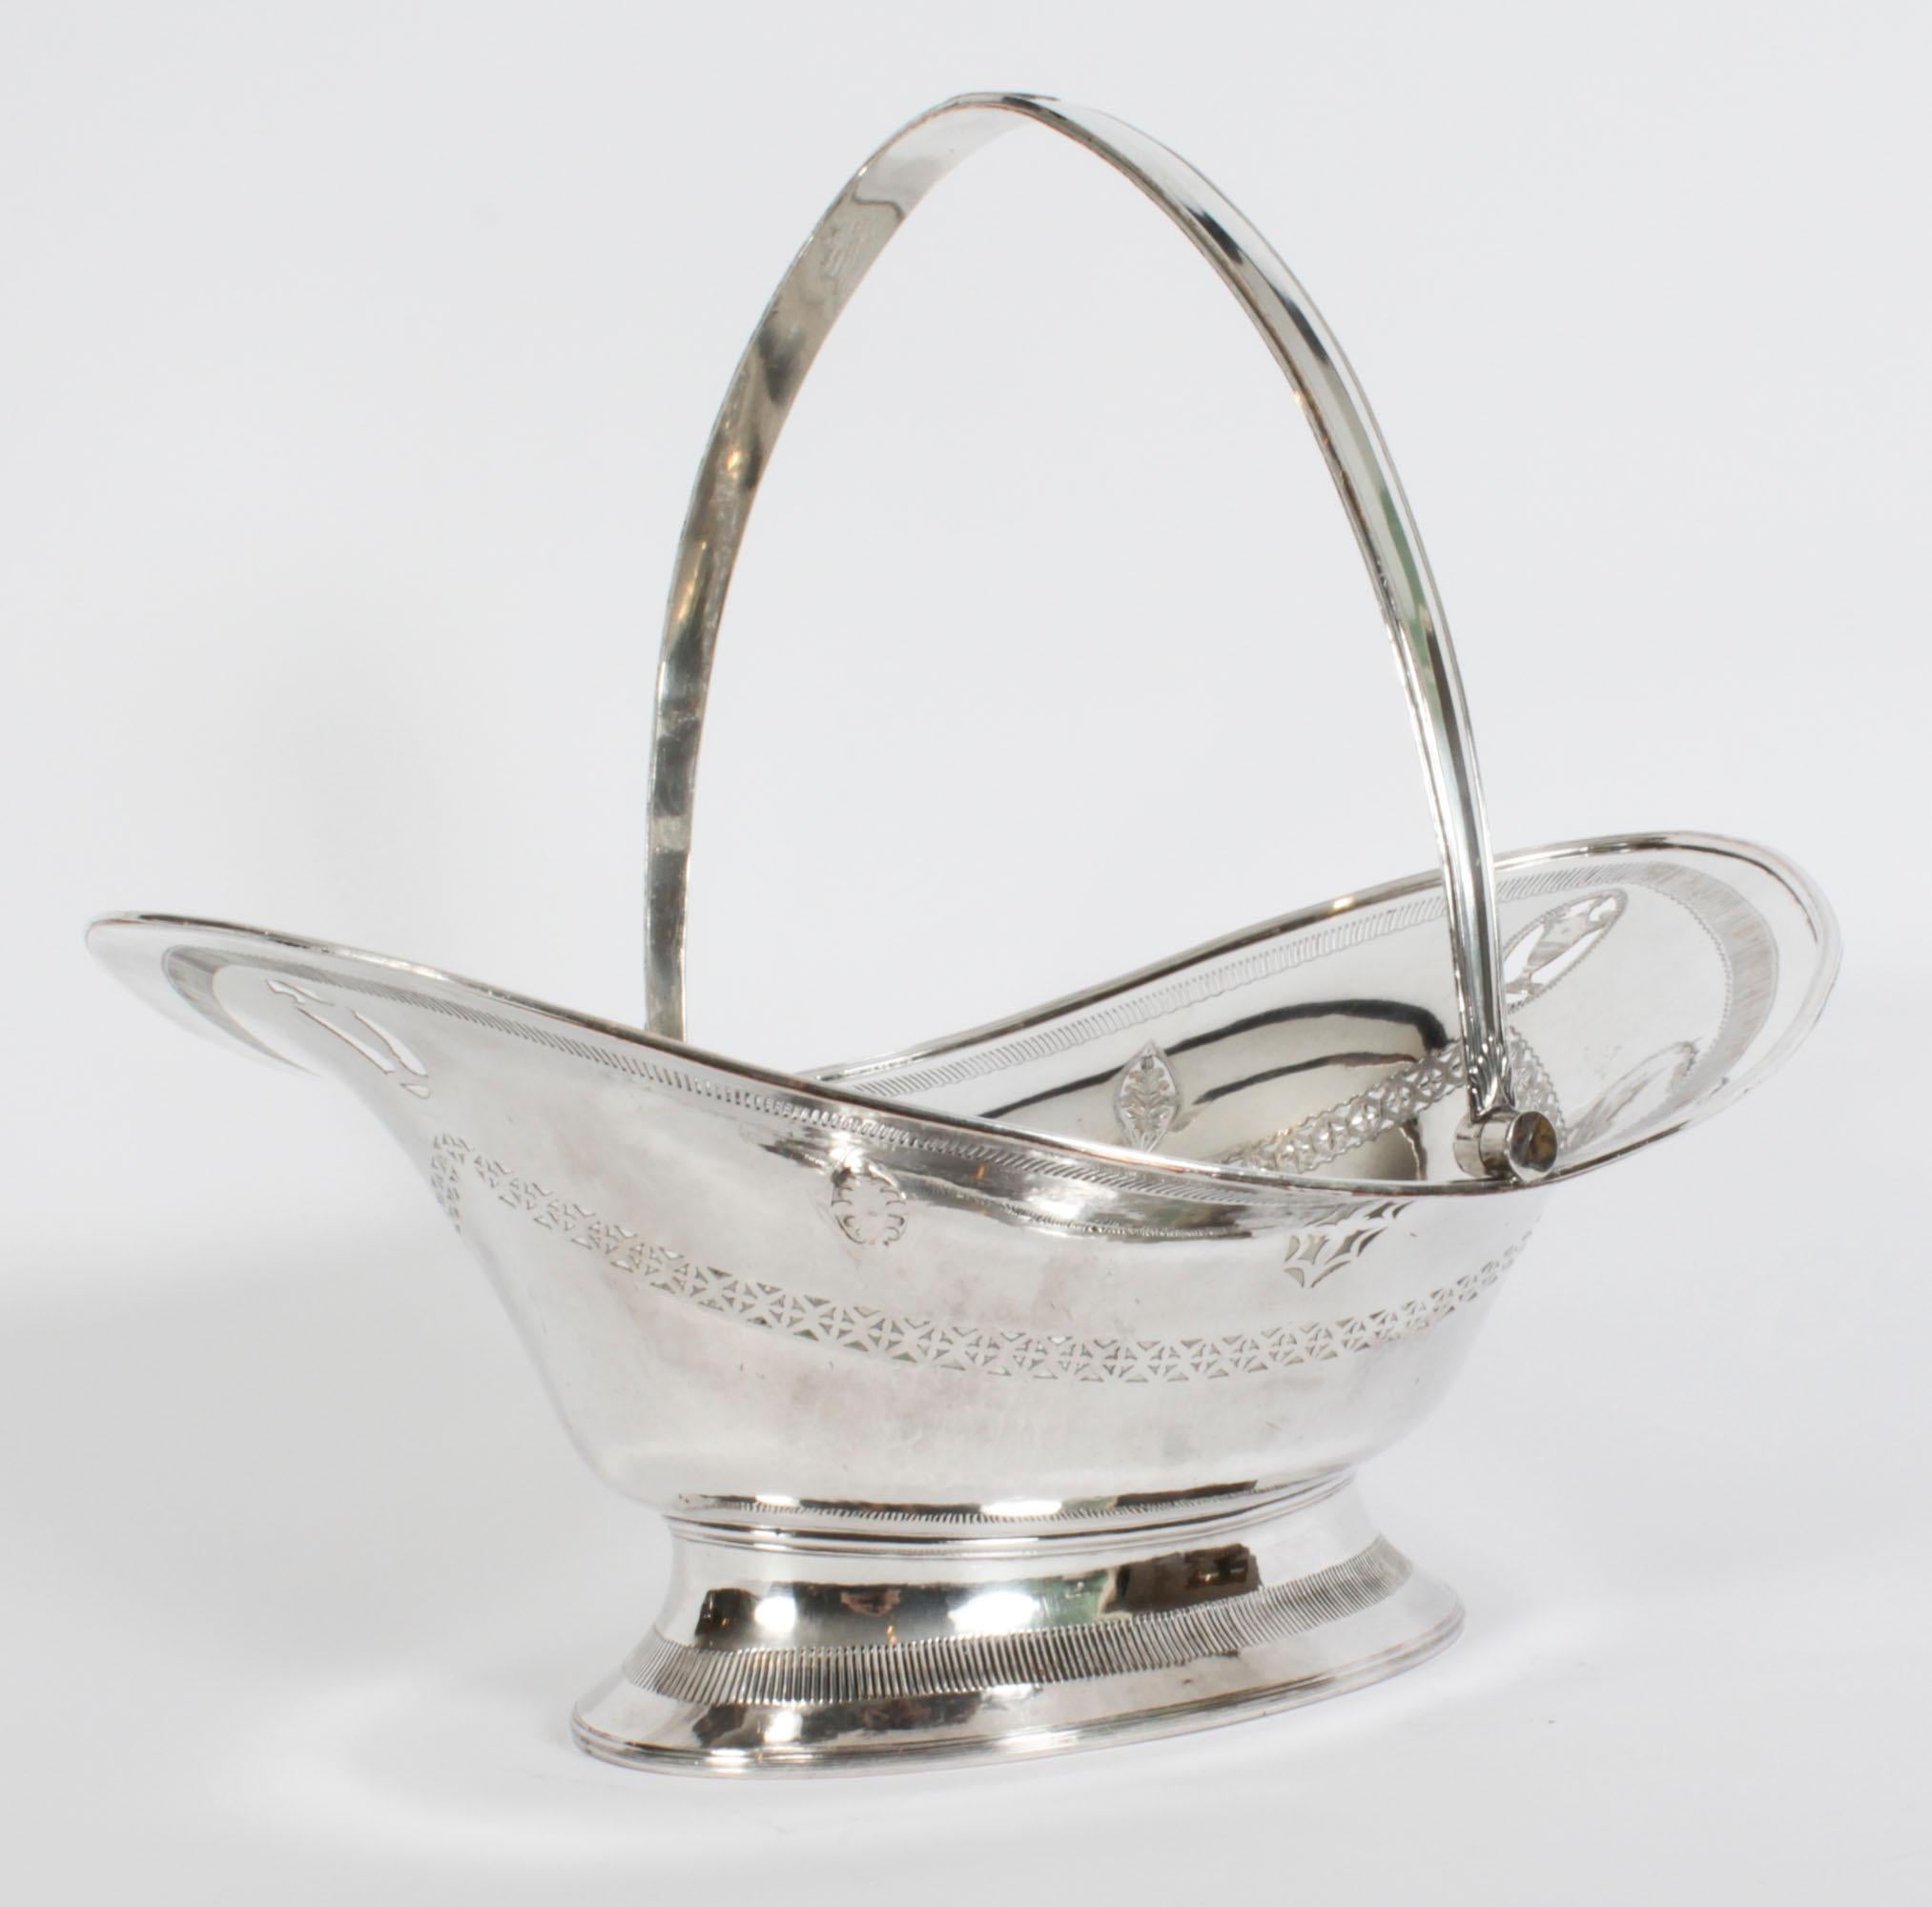 This is a fabulous antique Neo-classical George III Old Sheffield plate silver on copper bread basket / fruit dish, circa 1780 in date.
 
The oval swing handled dish features a pierced and engraved body in the Neo-Classical taste with a band of